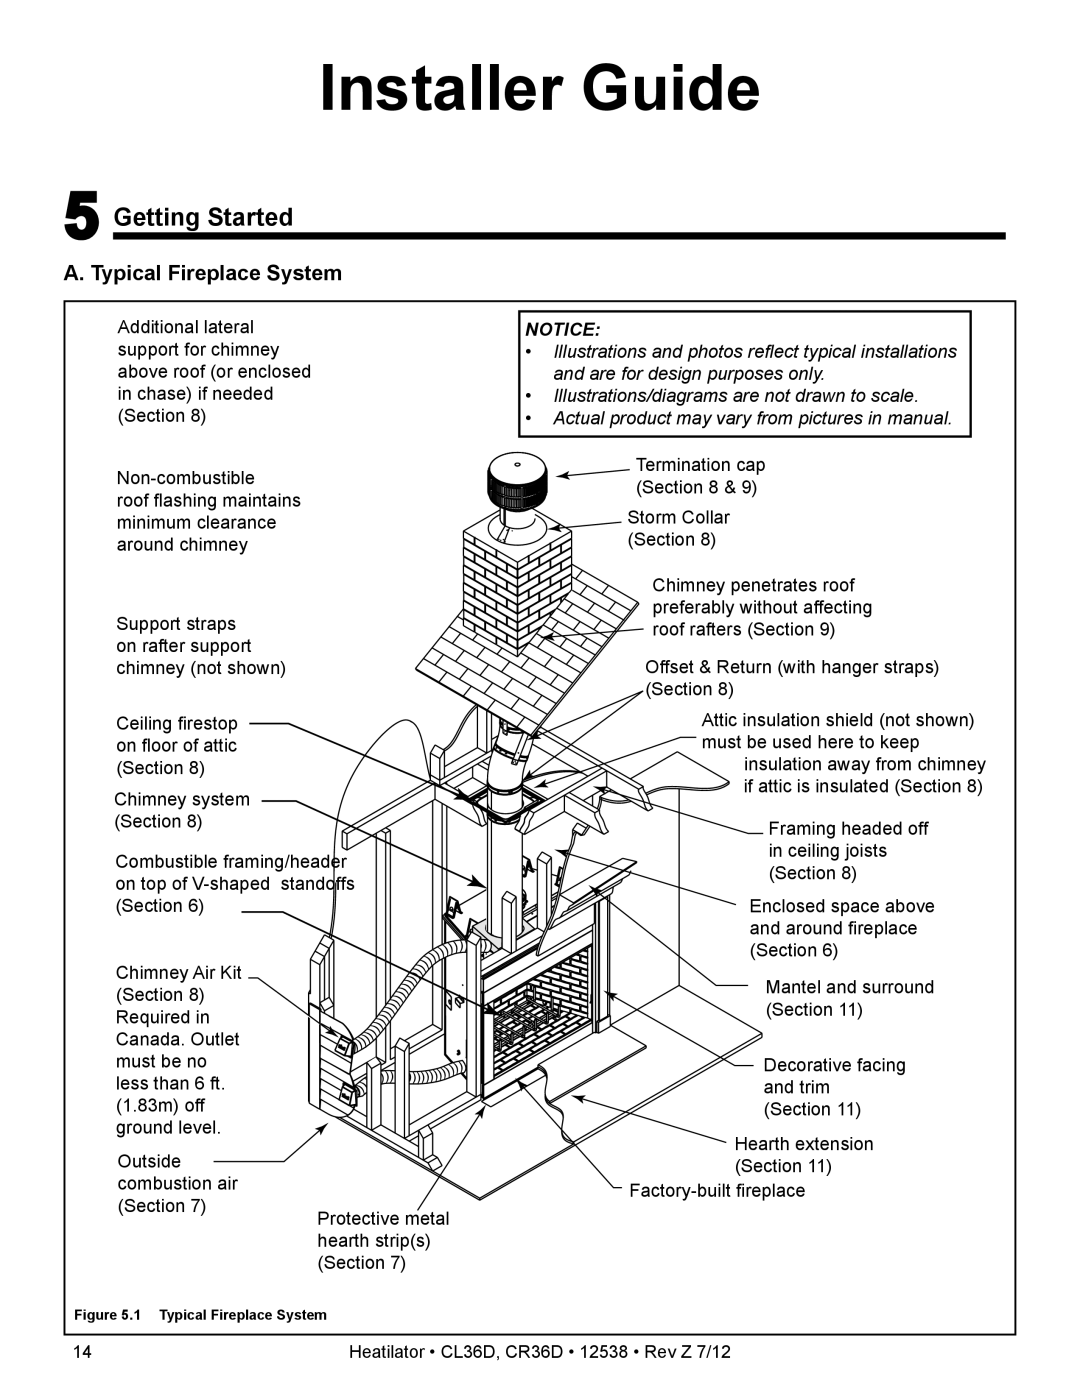 Heatiator CL36D owner manual Installer Guide, 5Getting Started, A. Typical Fireplace System, Notice 